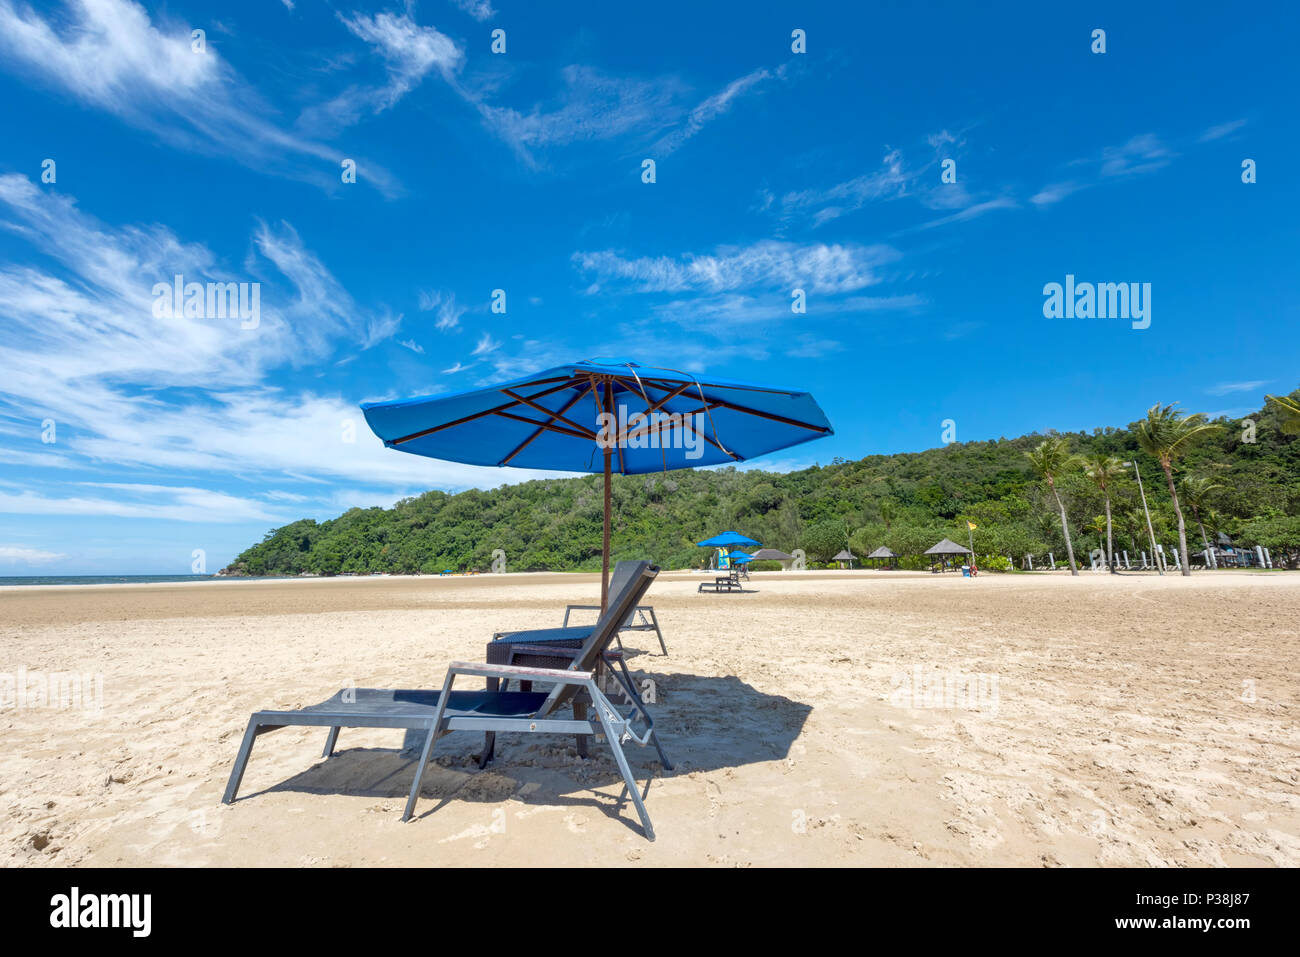 Sunbeds and Parasol on a white sand beach at the Shangri La Rasa Ria Hotel and Resort in Kota Kinabalu, Borneo on the edge of the South China Sea Stock Photo